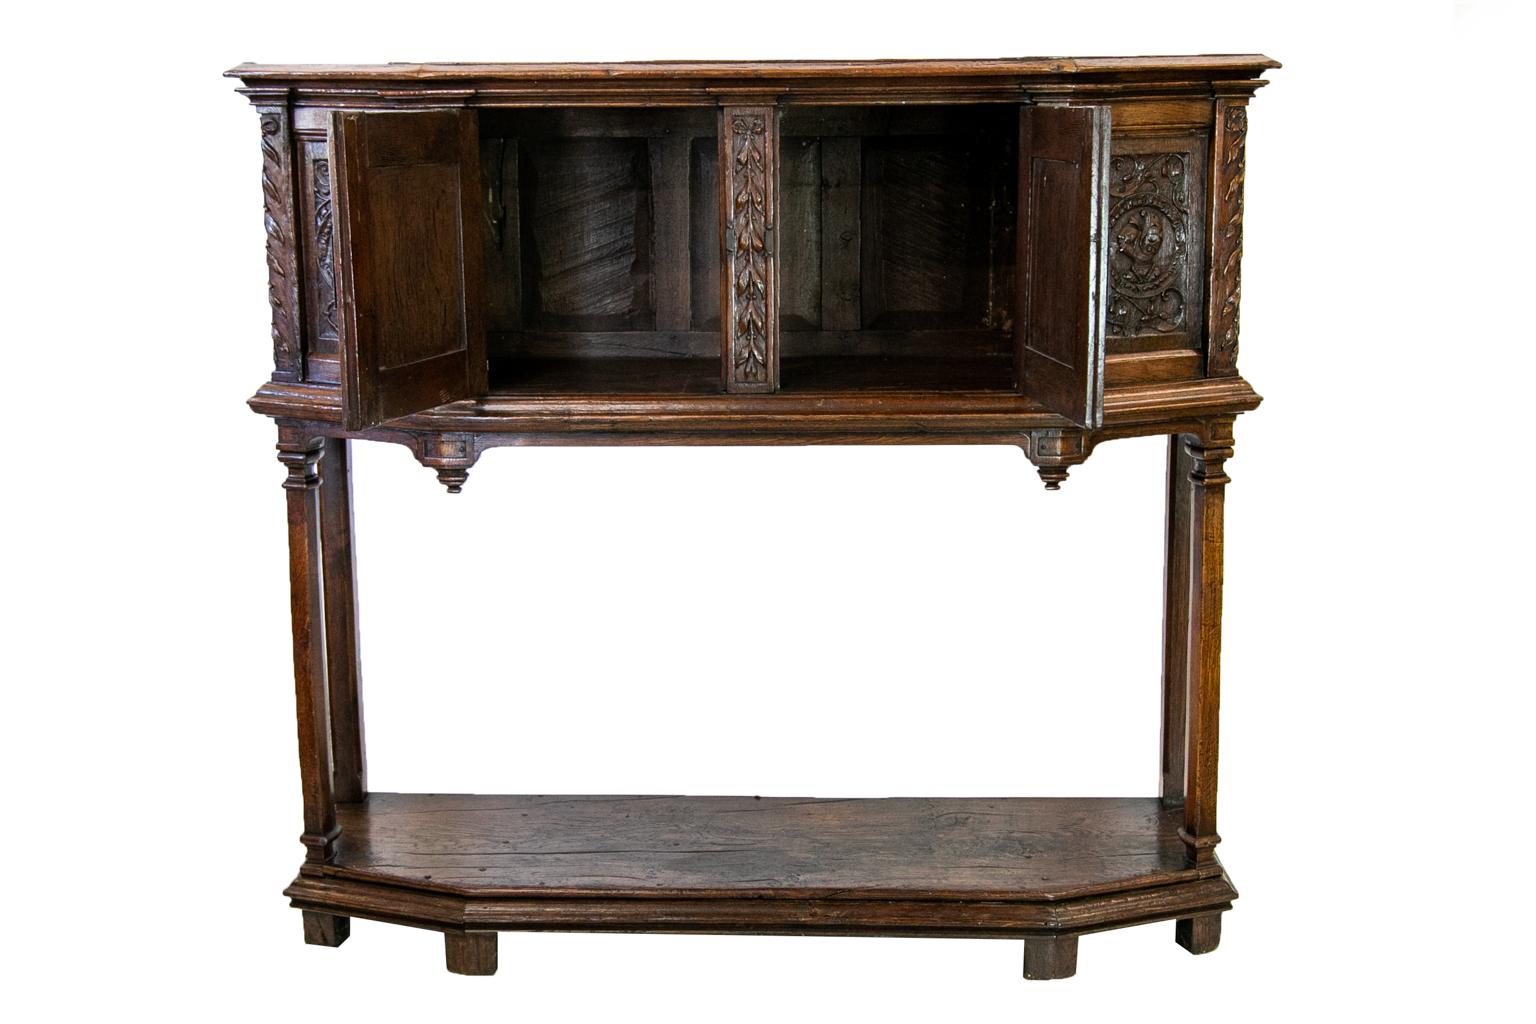 English Oak Jacobean style court cupboard has double peg construction and the original steel strap hinges and locking latches.There are six carved panels on the front and sides depicting bust surrounded by stylized birds and arabesques. The drawers